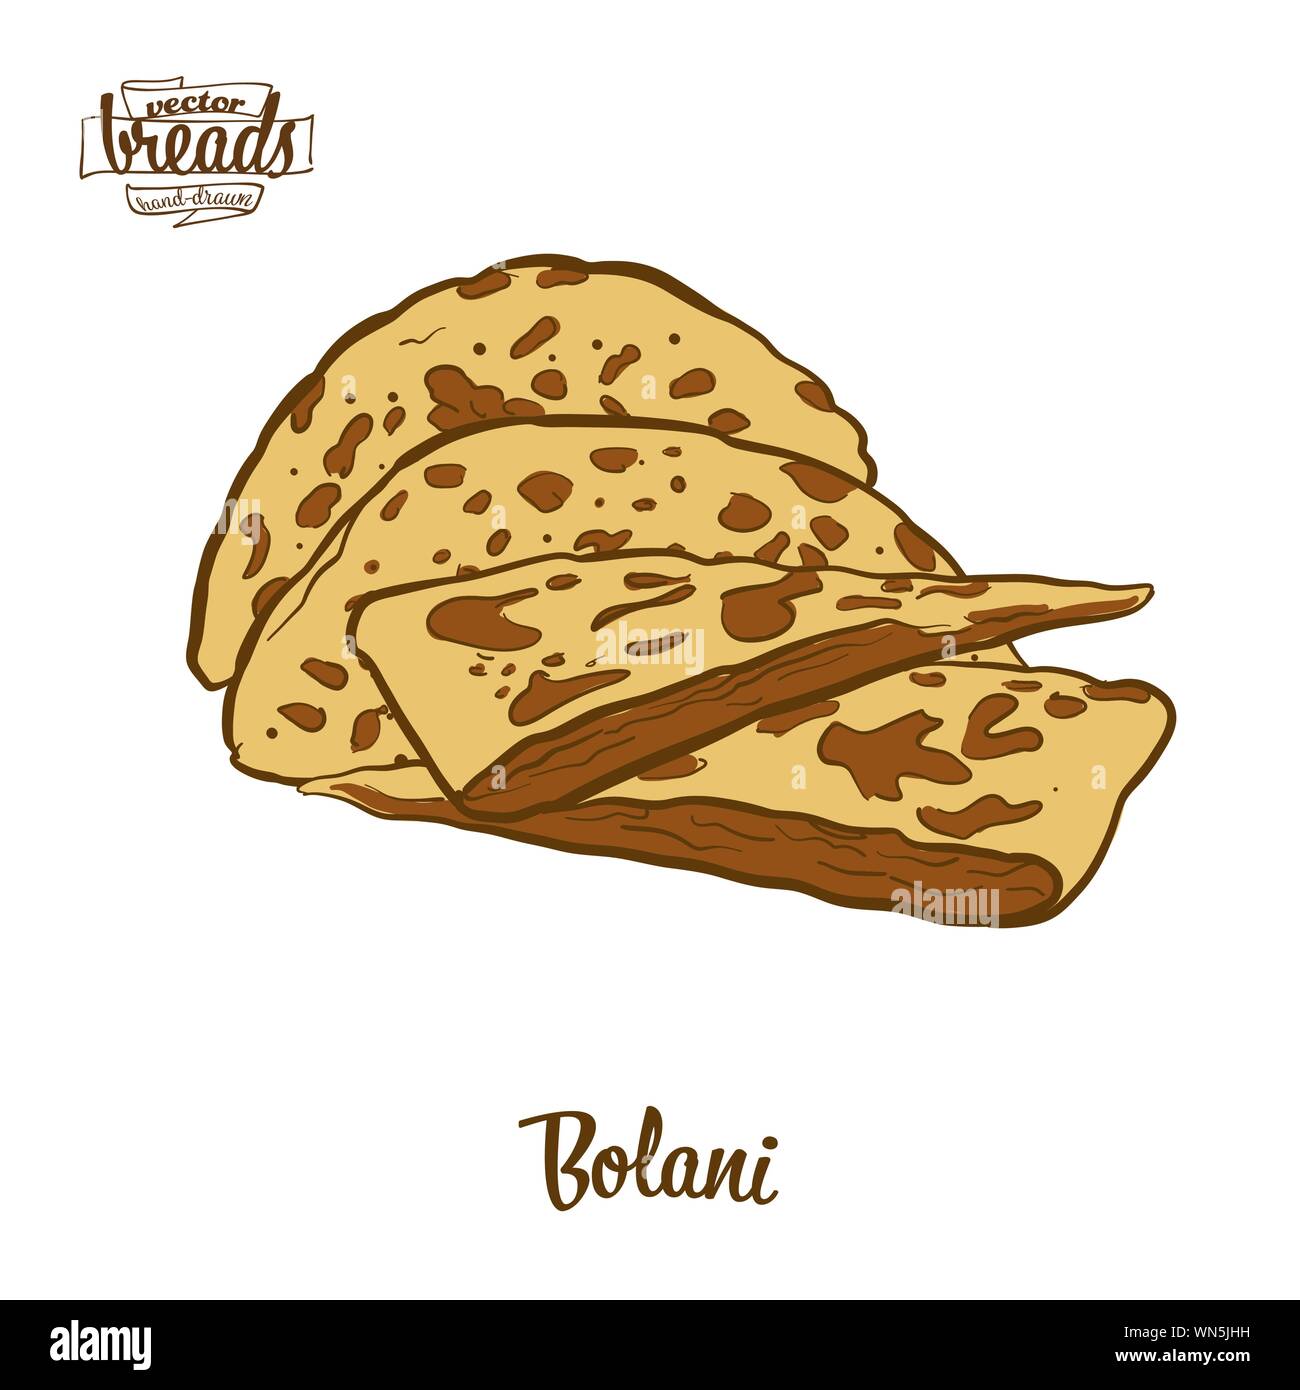 Colored drawing of Bolani bread. Vector illustration of Flatbread food, usually known in Afghanistan. Colored Bread sketches. Stock Vector